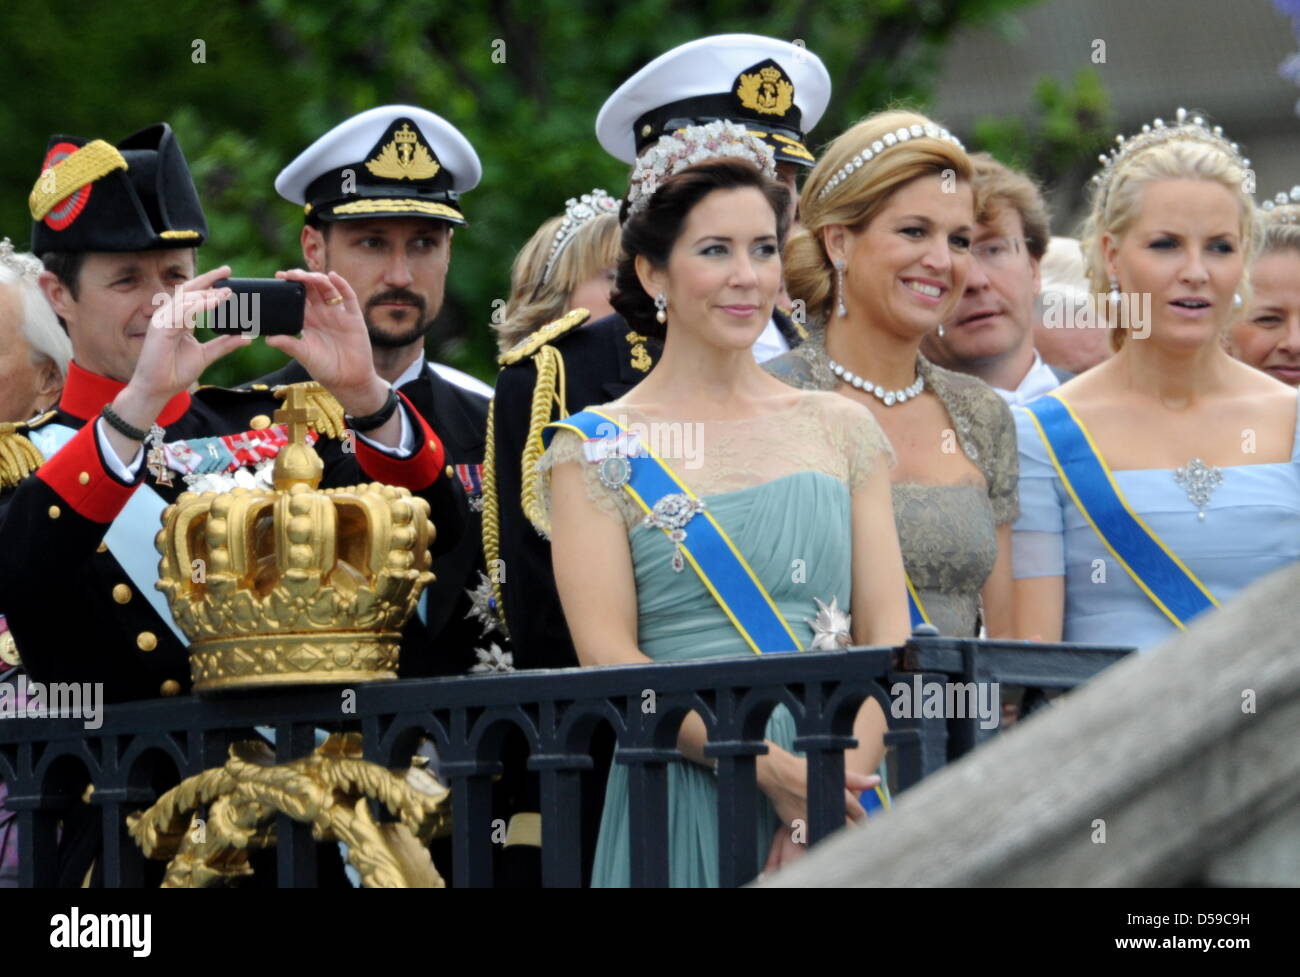 (L-R) Crown Prince Frederik of Denmark, Princess Mary of Denmark, Princess Maxima of the Netherlands , Crown Prince Willem-Alexander of the Neterlands and Princess Mette-Marit of Norway share a light moment at on the balcony of the Royal Palace after the wedding of Sweden's Crown Princess Victoria and Prince Daniel, the Duke of Vastergotland, in Stockholm, Sweden, 19 June 2010. Pho Stock Photo